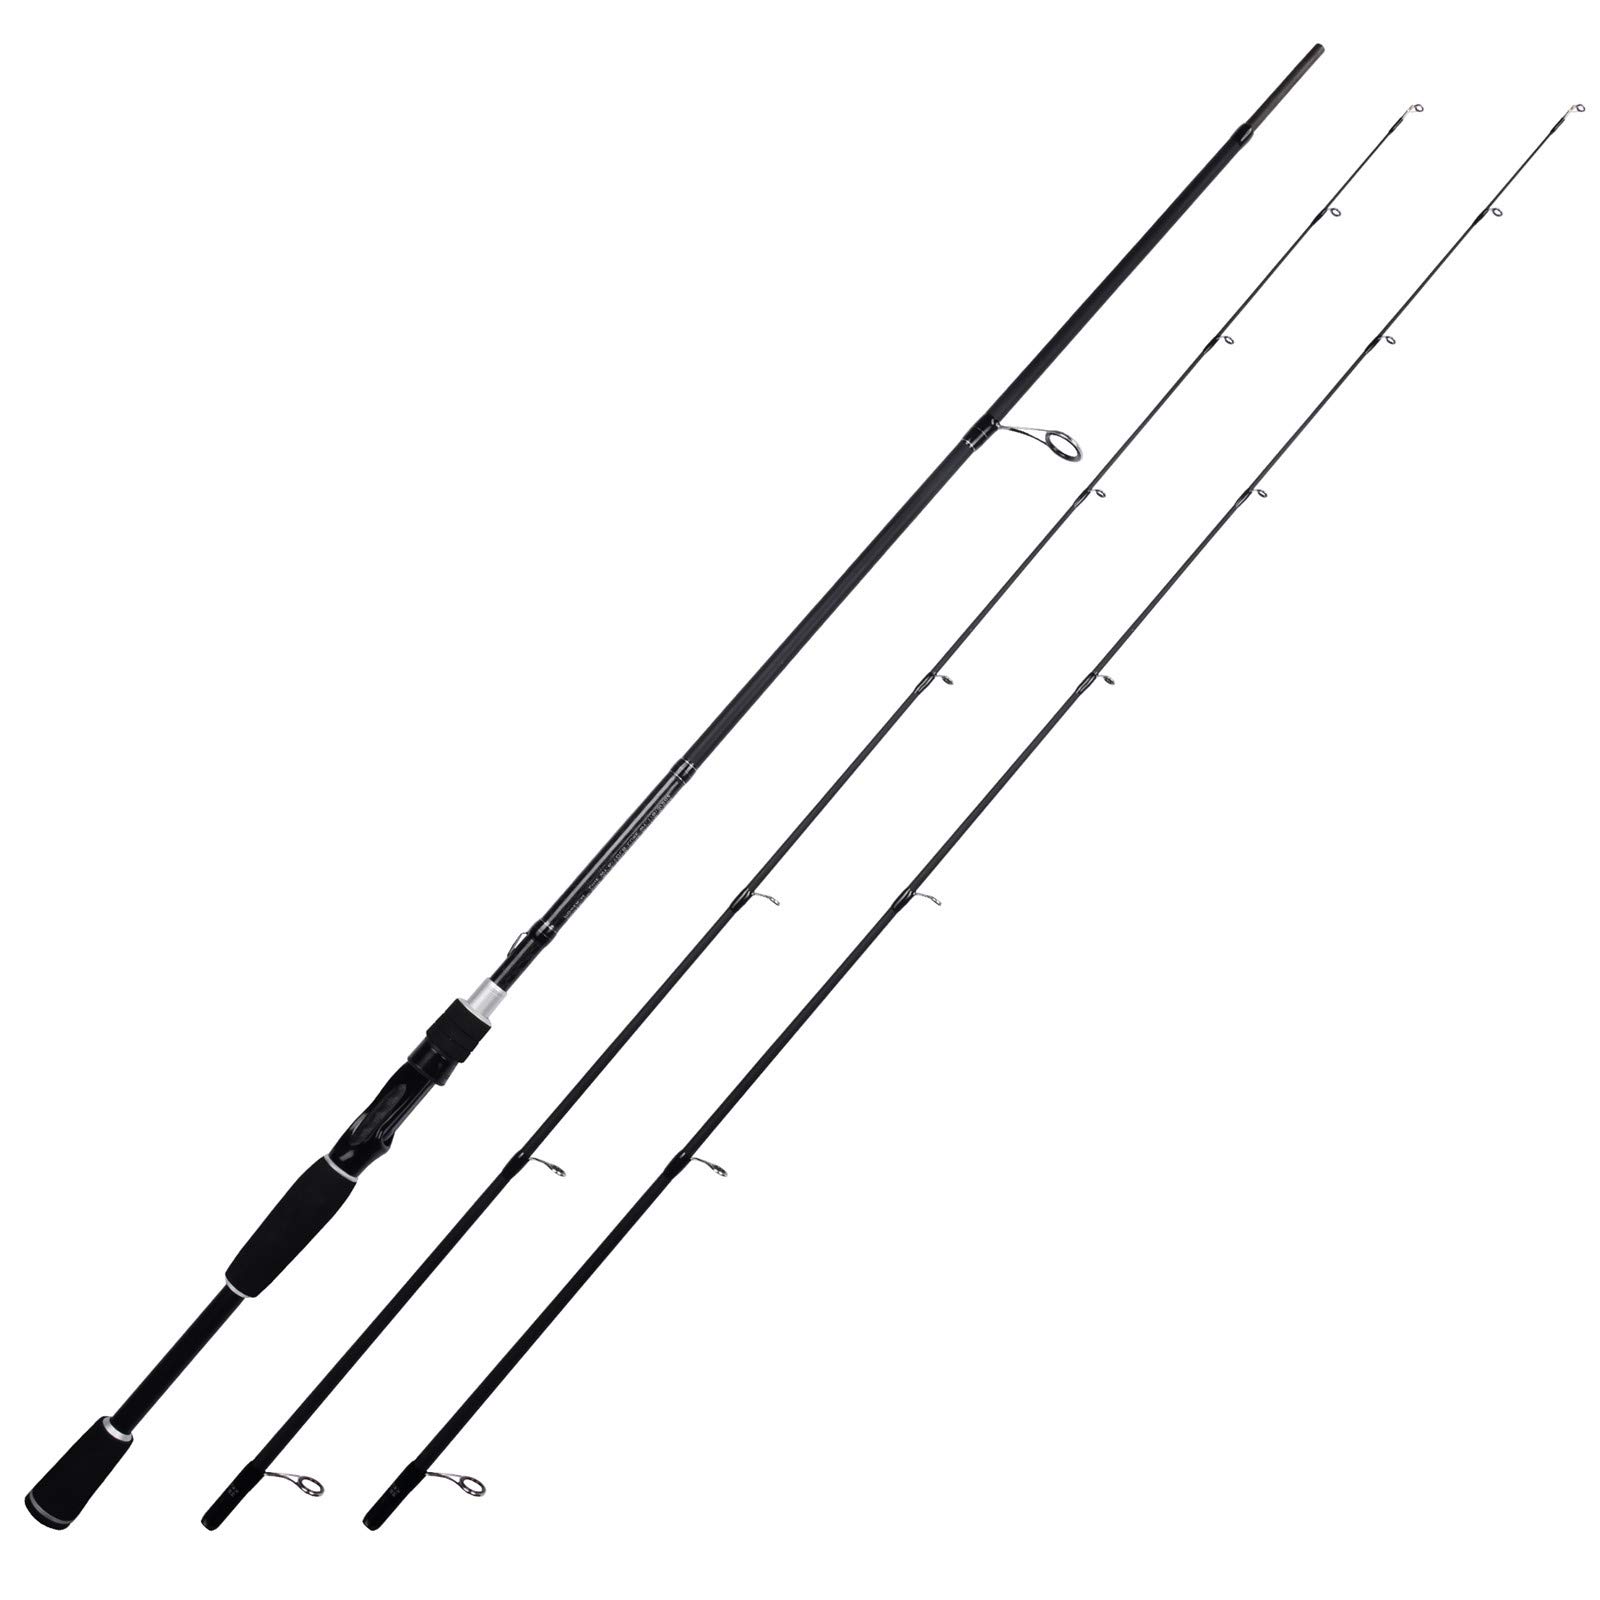 KastKing Perigee II Fishing Rods - Fuji O-Ring Line Guides, 24 Ton Carbon  Fiber Casting and